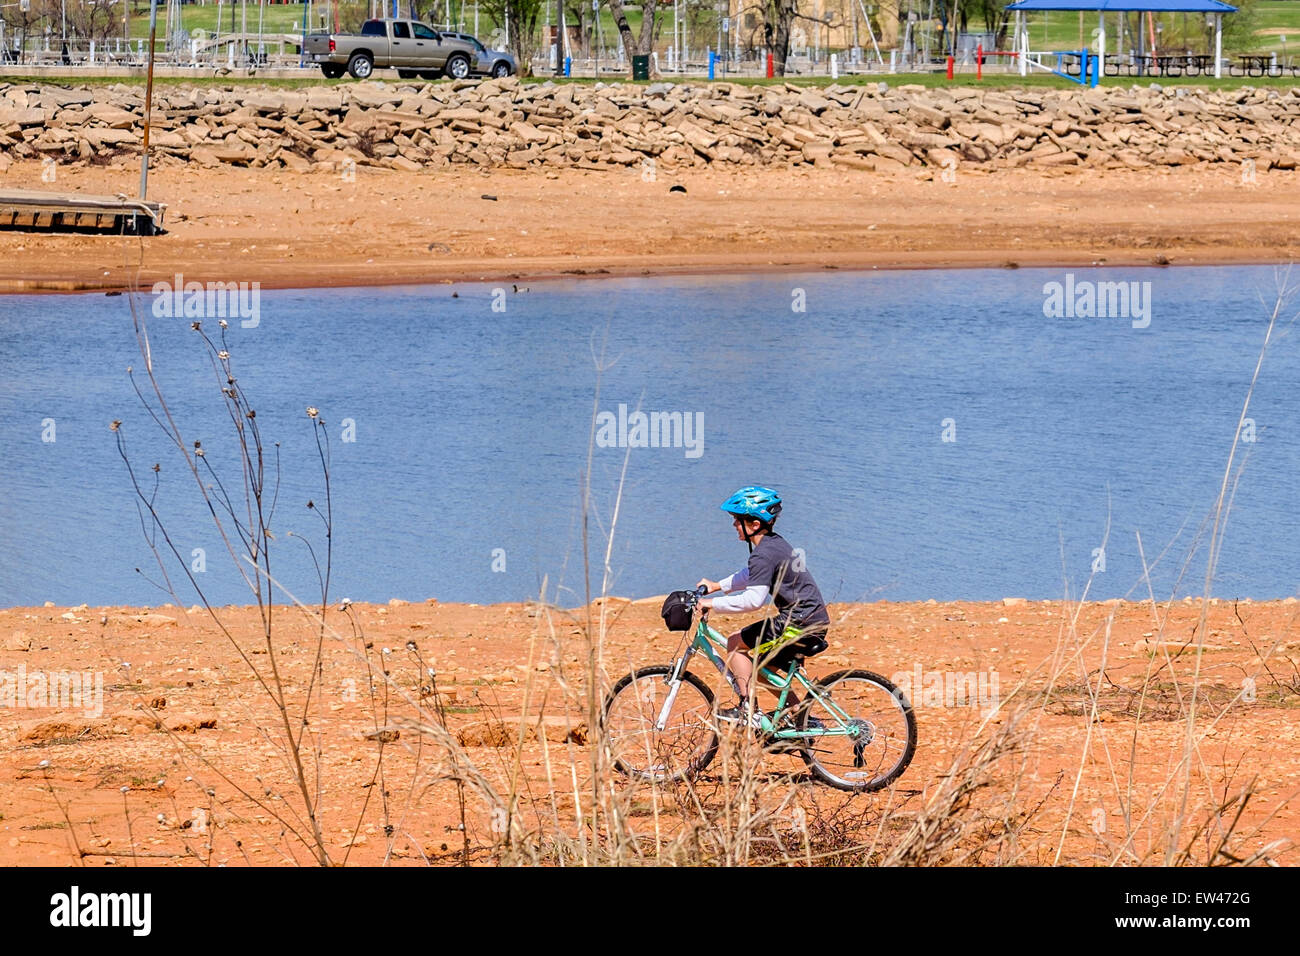 A boy rides his bicycle on a dry lake bed at Lake Hefner during a drought in Oklahoma City, Oklahoma, USA. Stock Photo